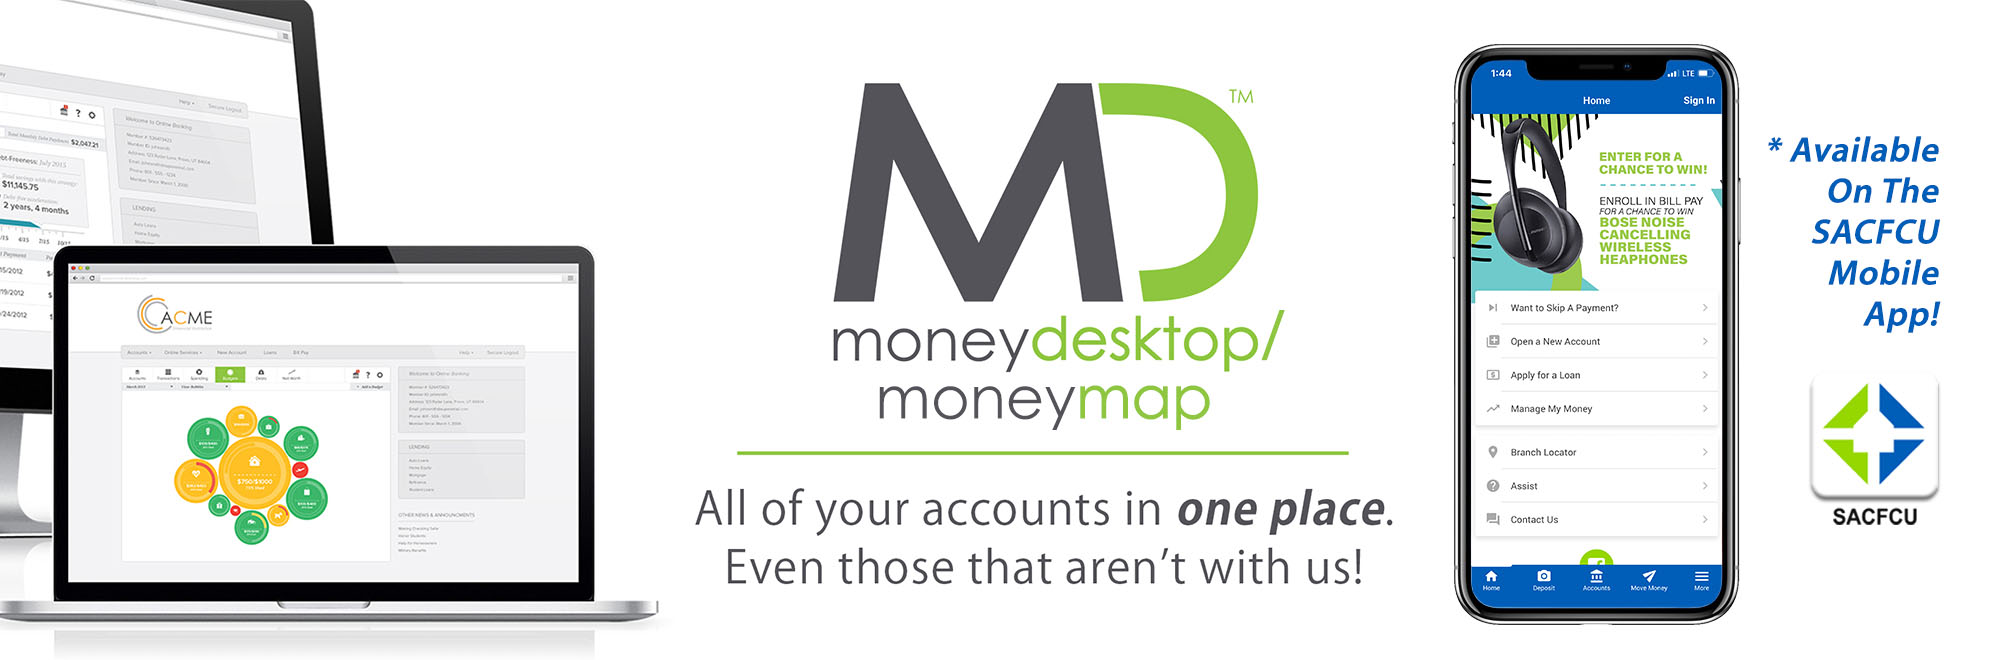 MoneyDesktop gives you access to all of your accounts in one place - even the ones that aren't with us